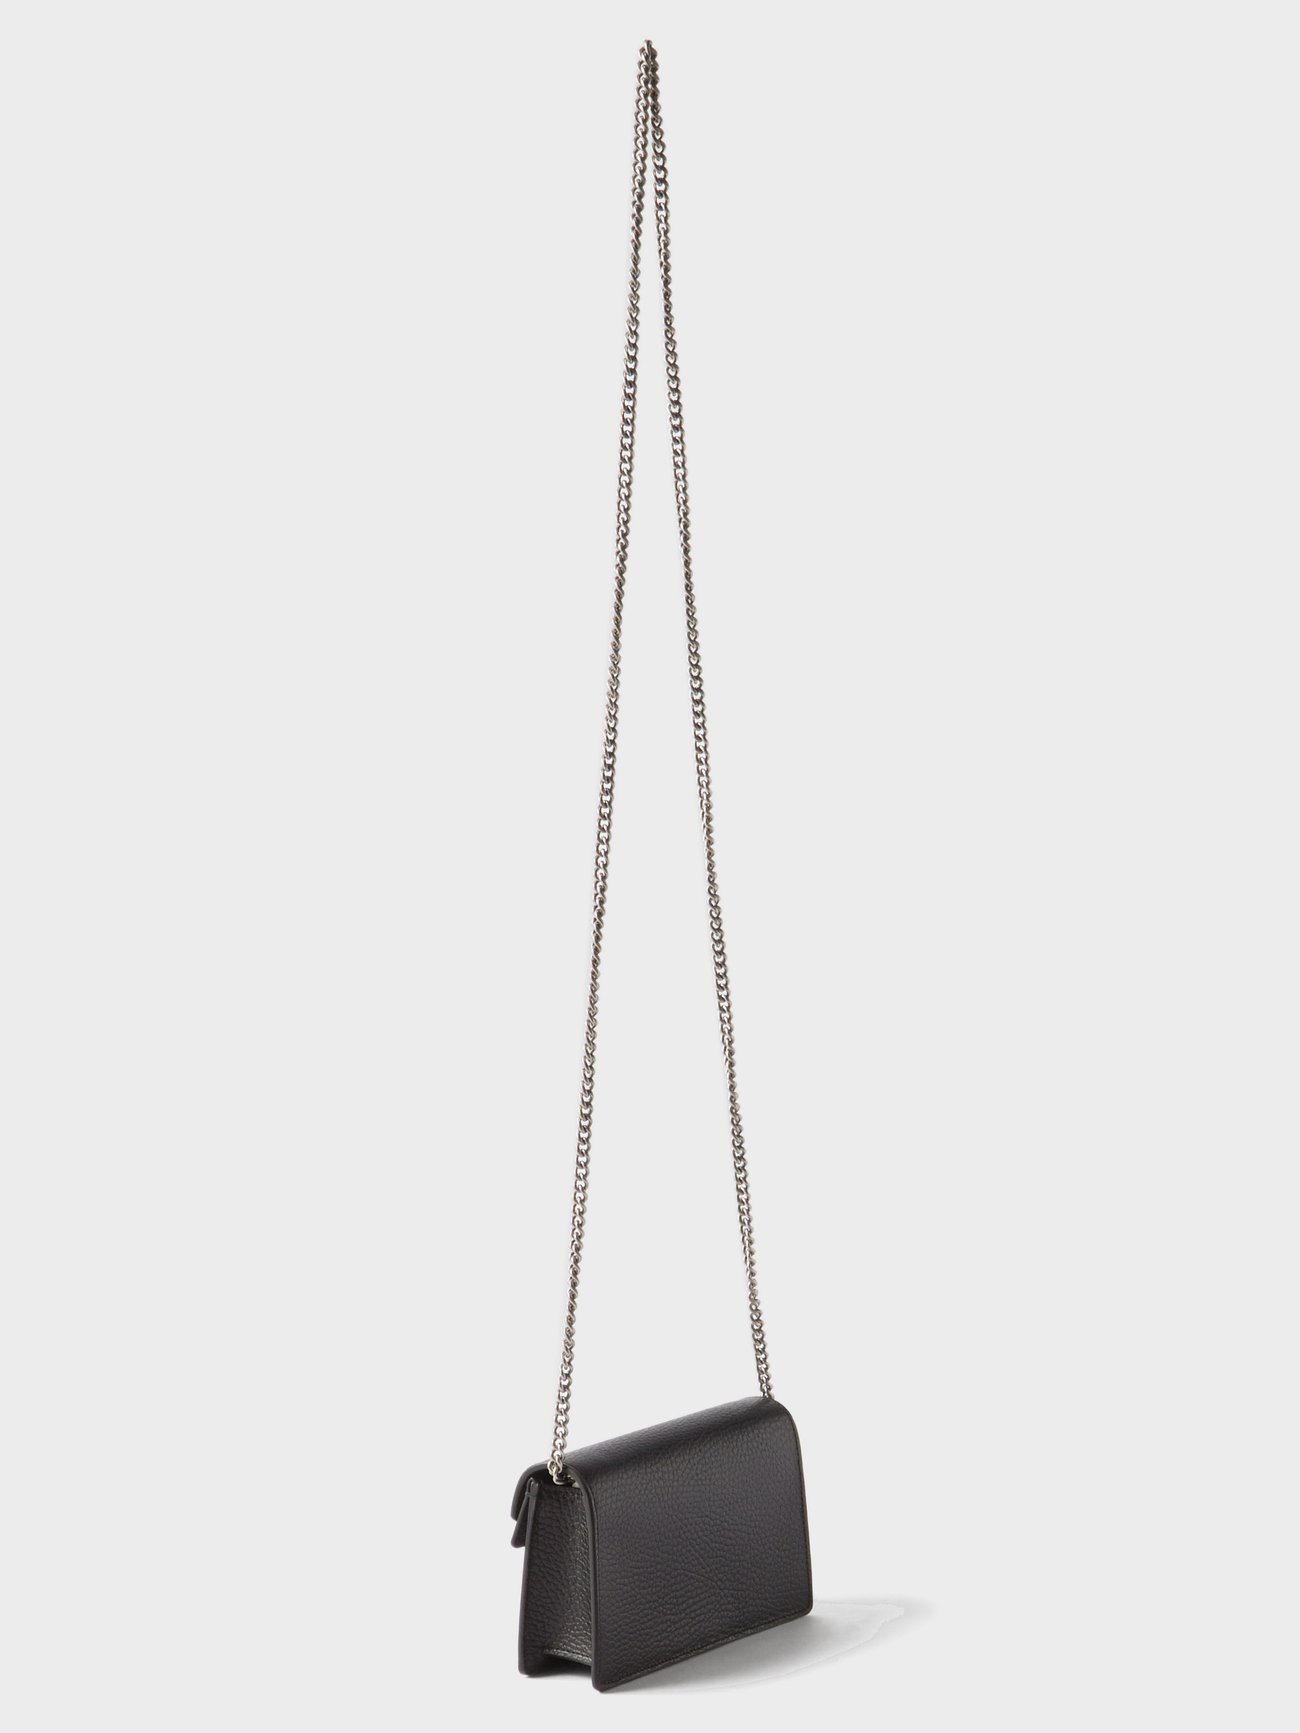 Black Dionysus crystal and leather cross-body bag